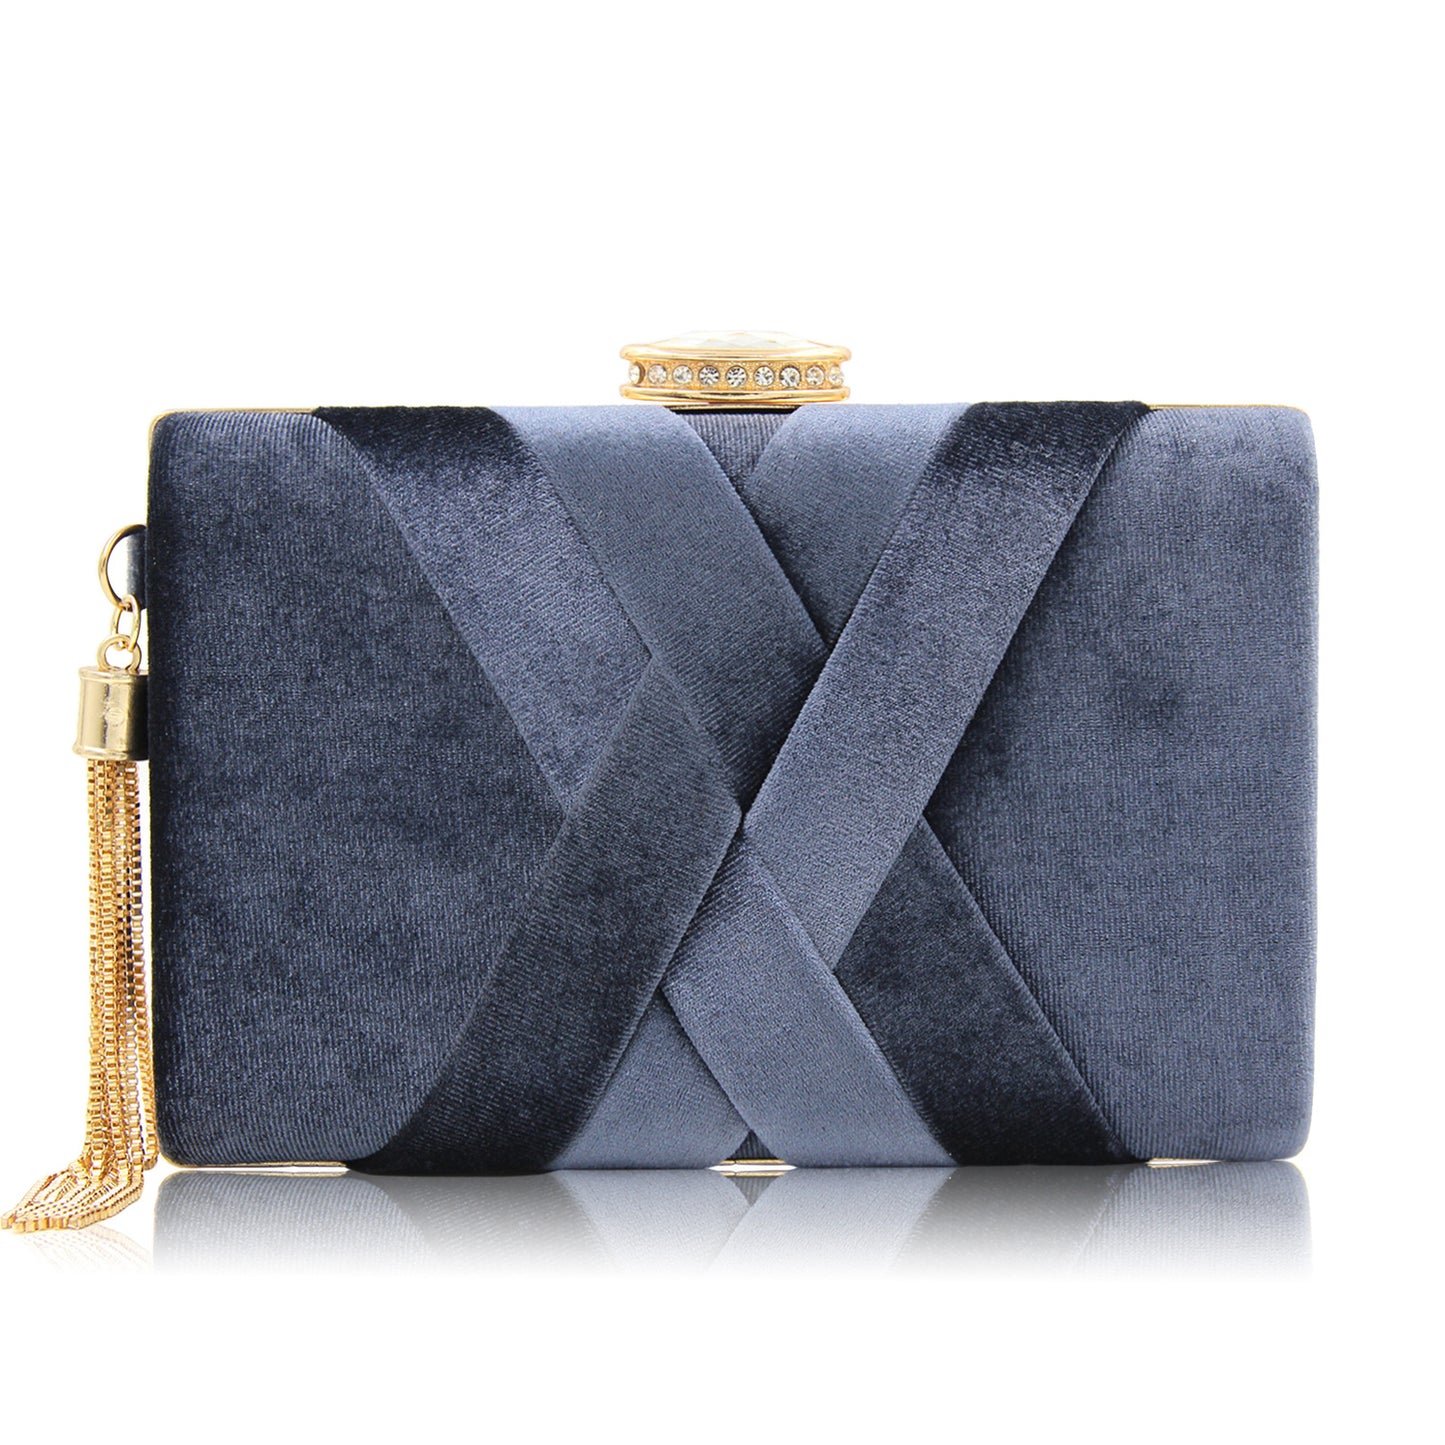 Women Clutch Bags - Top Quality Suede Clutches Purses